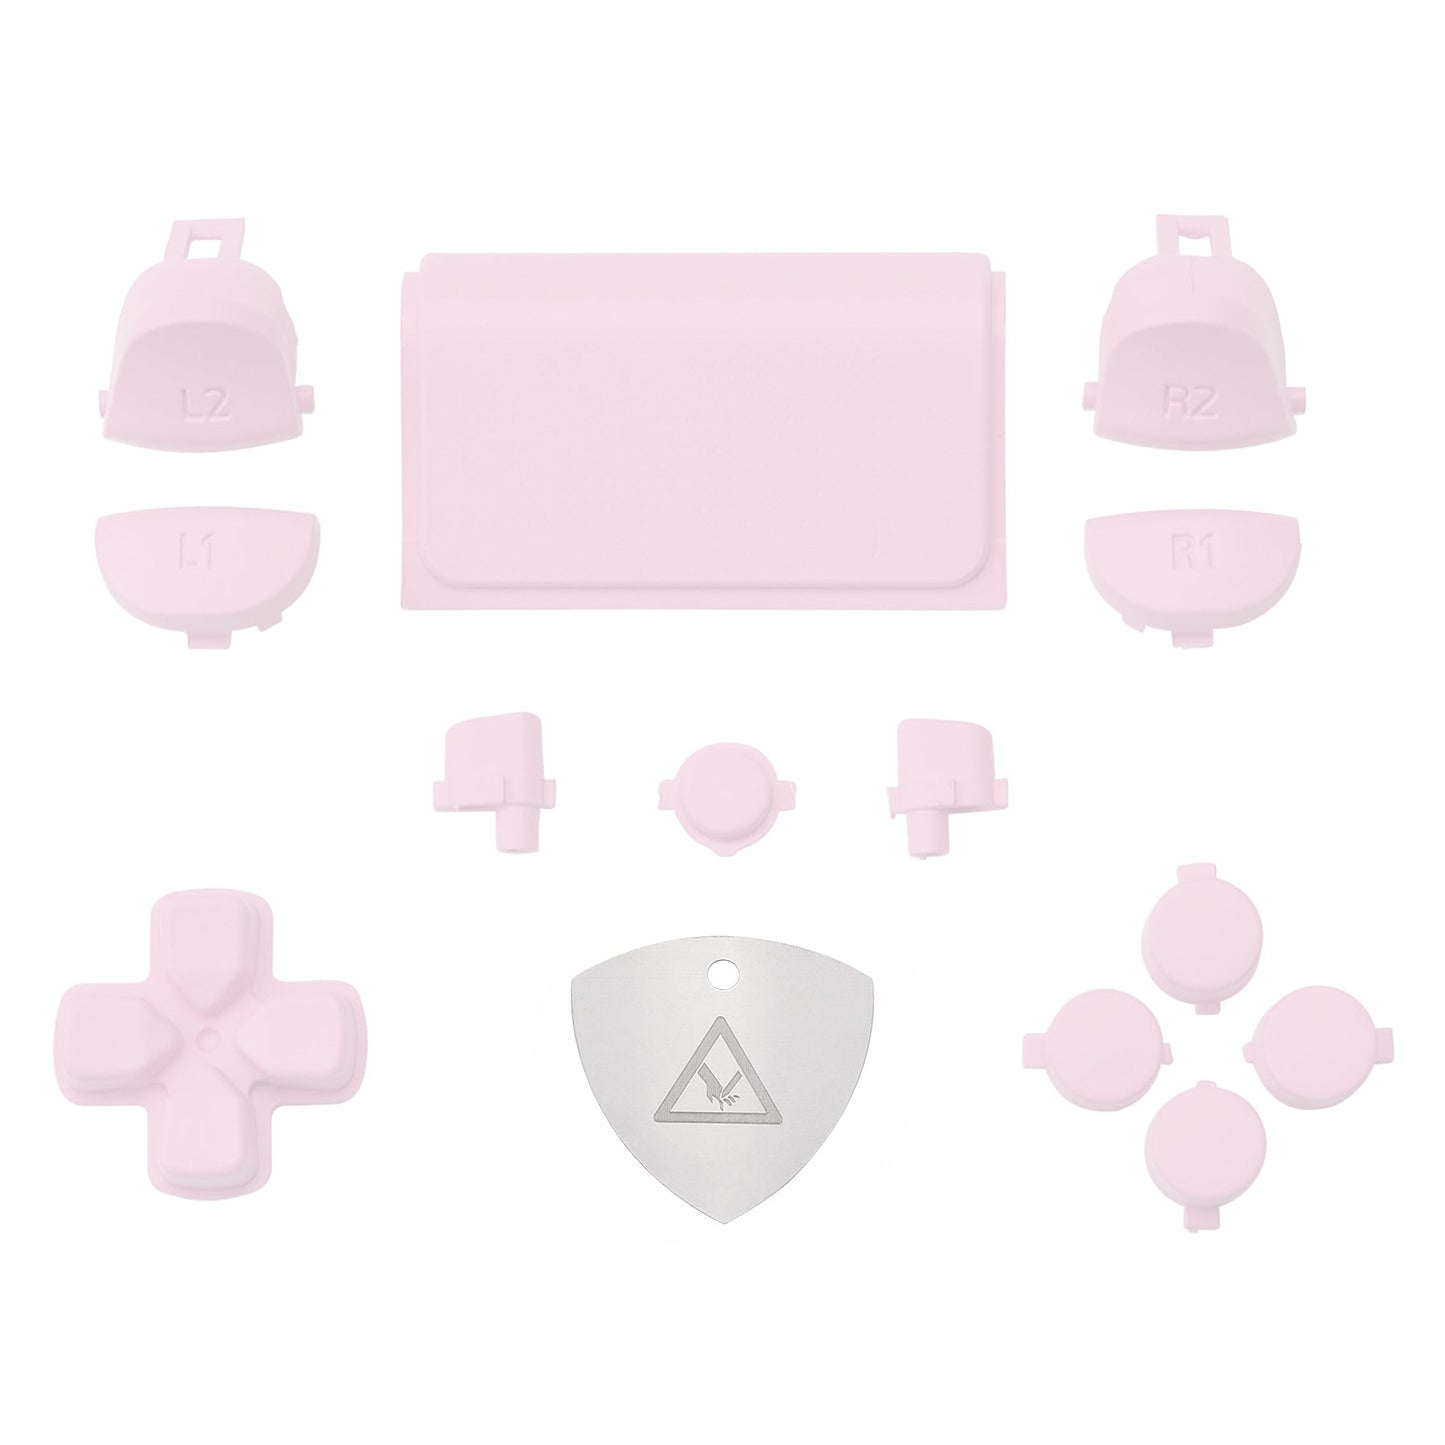 Repair eXtremeRate for Replacement D-pad Set Cherry L2 for Pink Triggers Action Touchpad L1 Buttons Options Controller, Home Blossoms eXtremeRate R1 Slim Buttons – Pro Kit ps4 Controller R2 Share ps4 Full